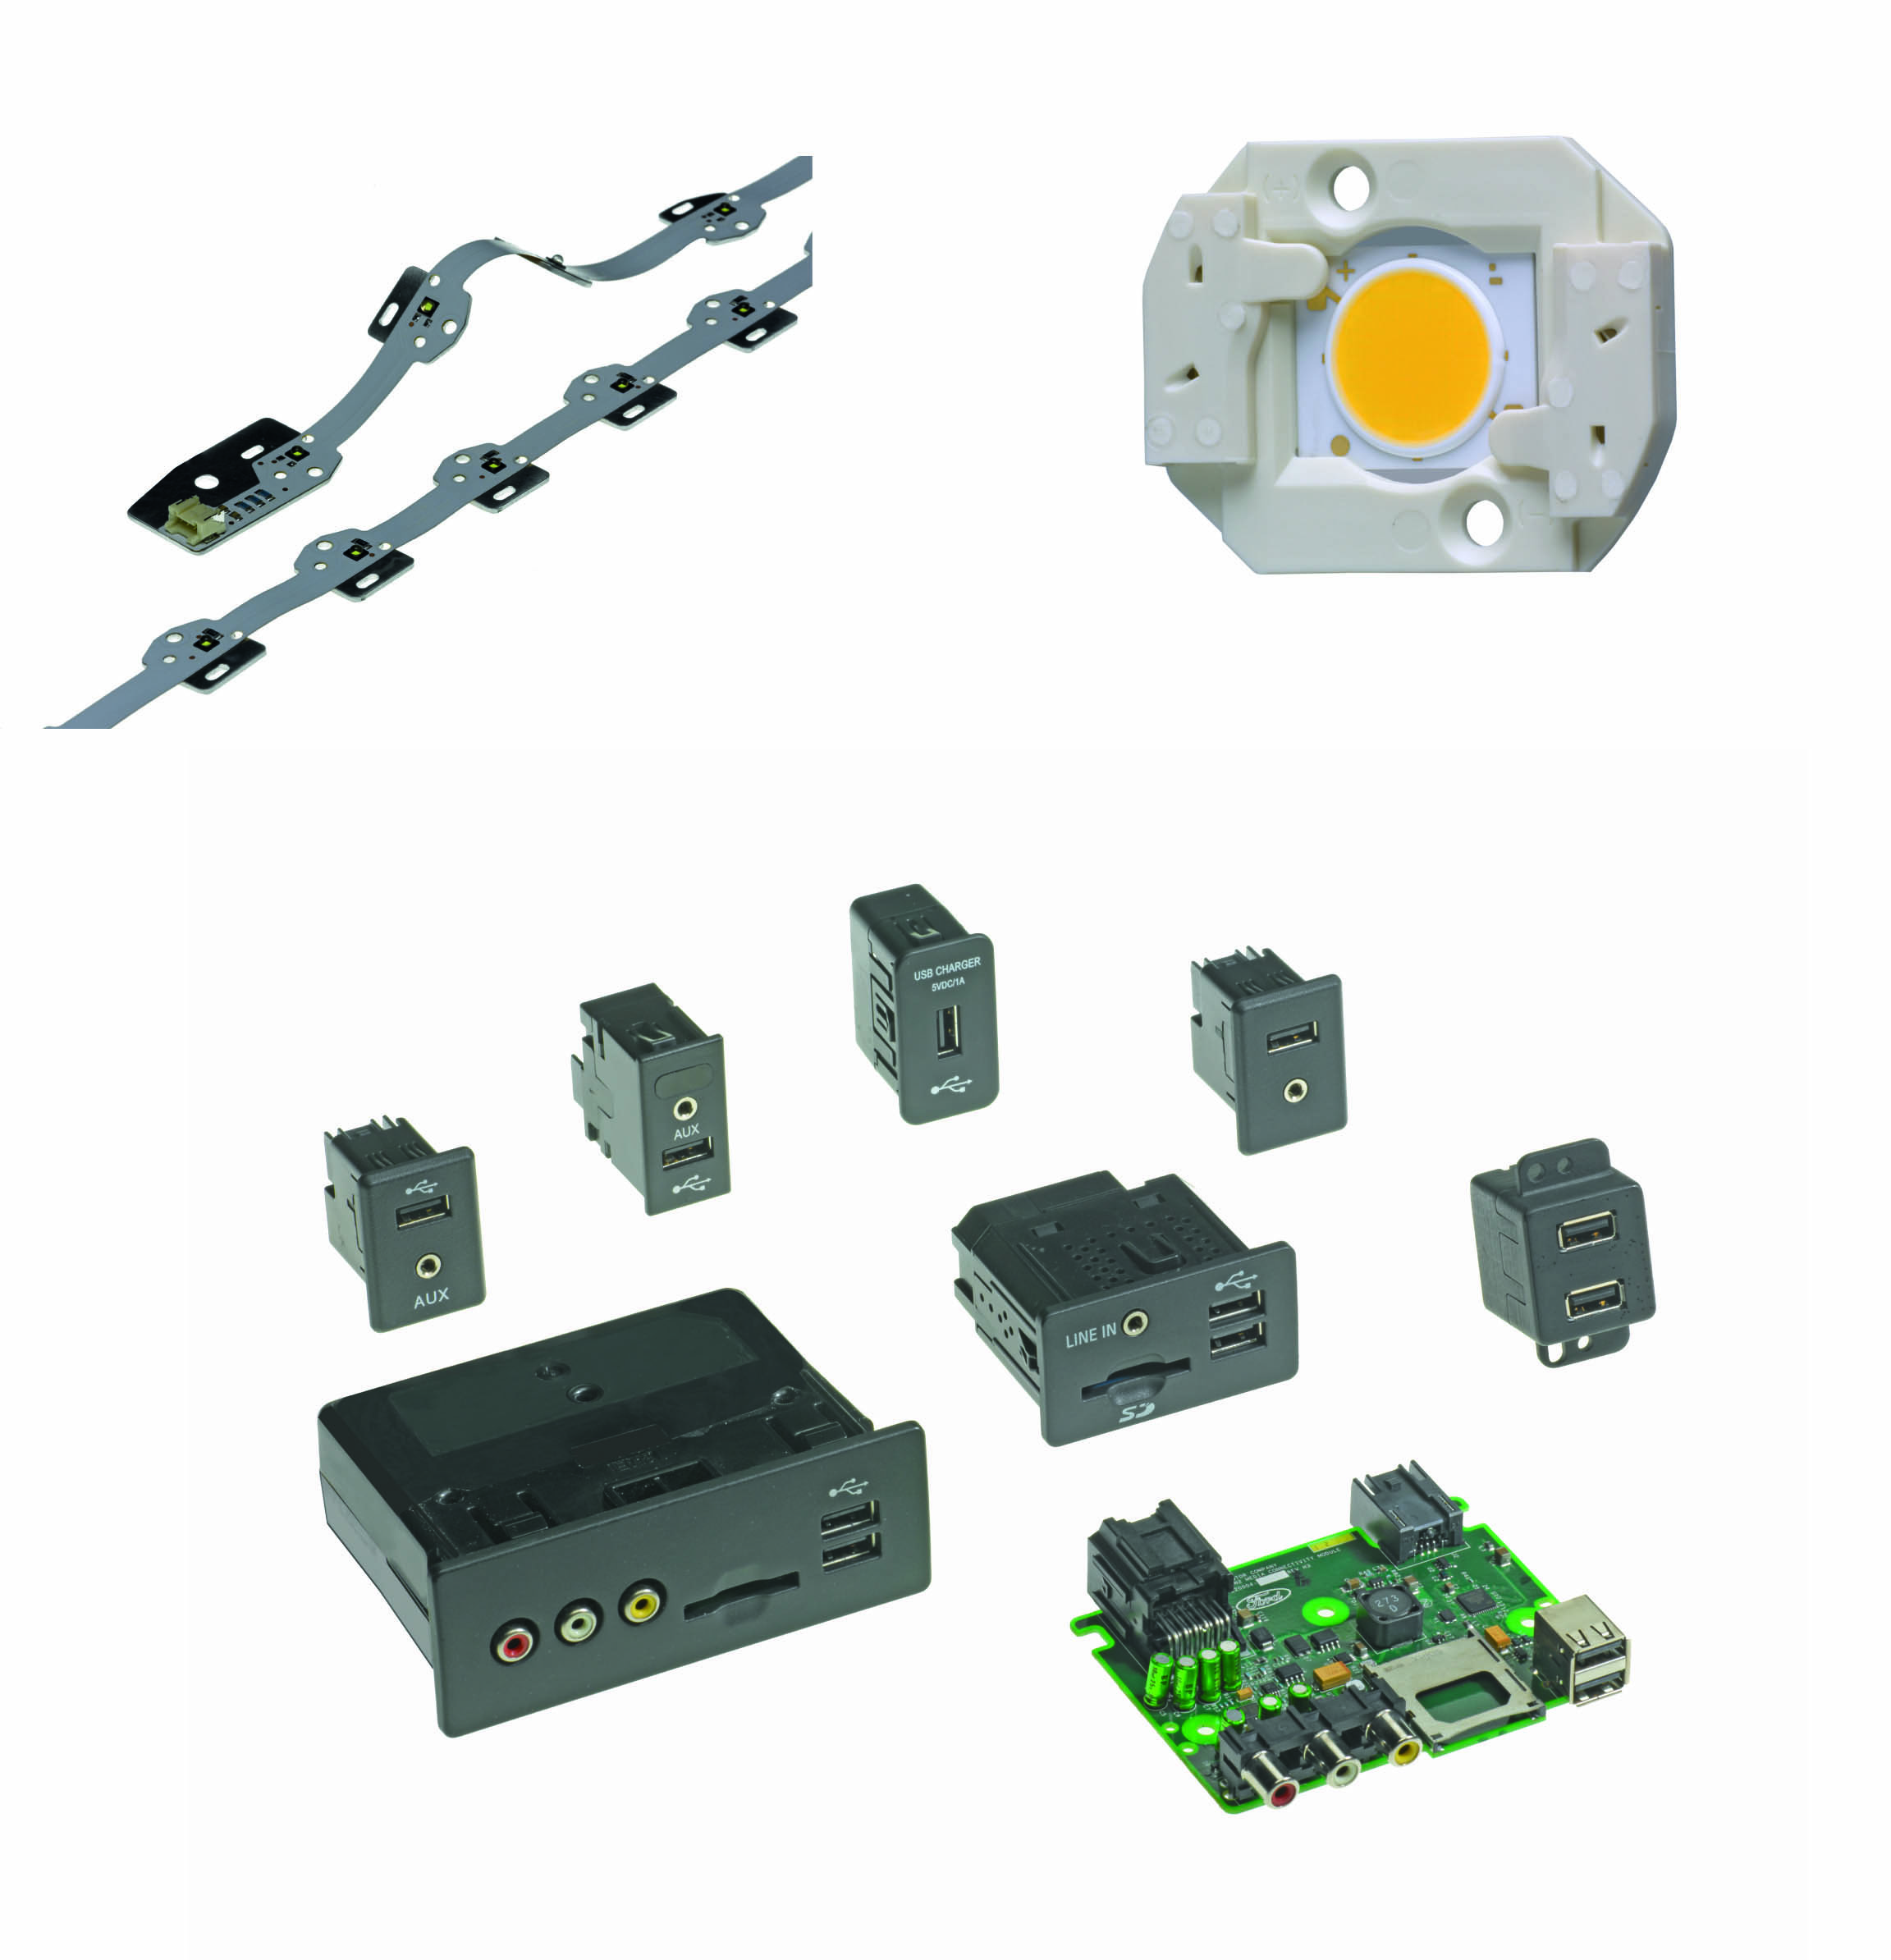 Molex offers electronic solutions for aircraft interiors